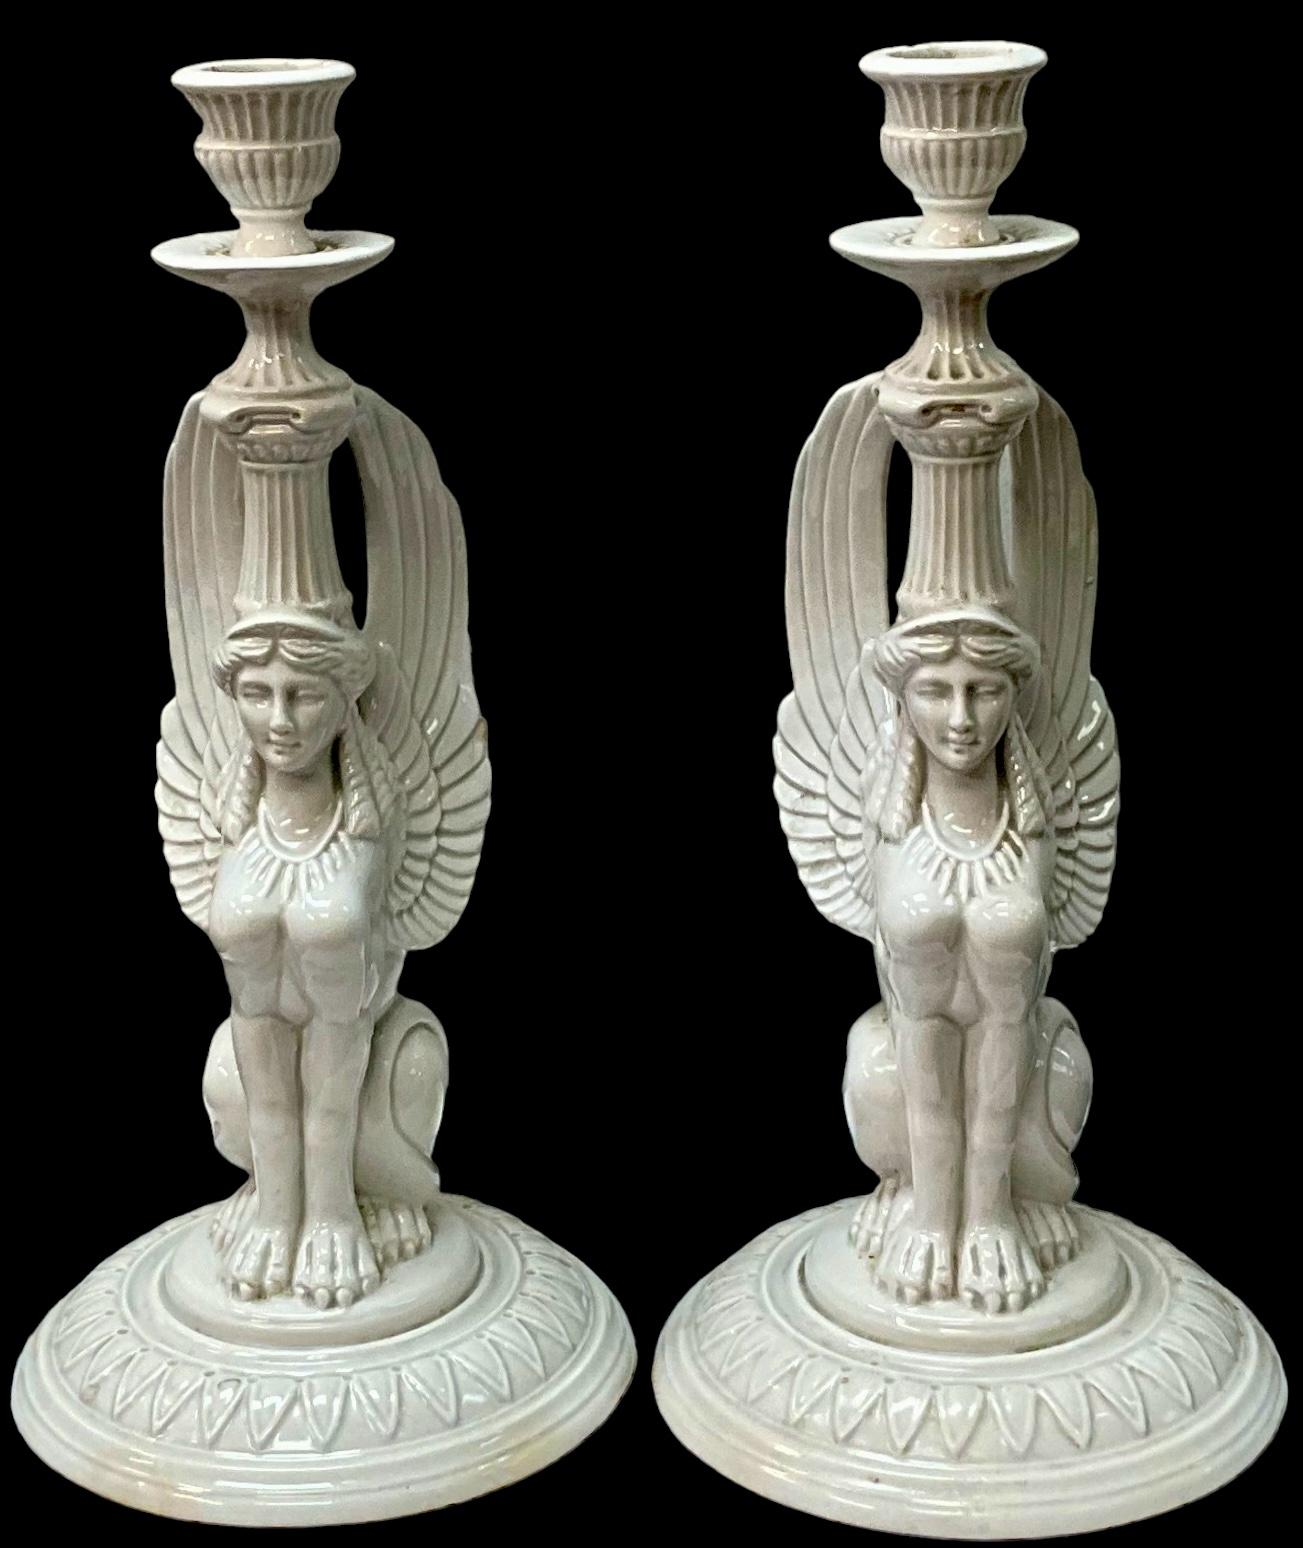 Late 20th Century Egyptian Revival White Porcelain Sphinx Form Fitx & Floyd Candlesticks - Pair